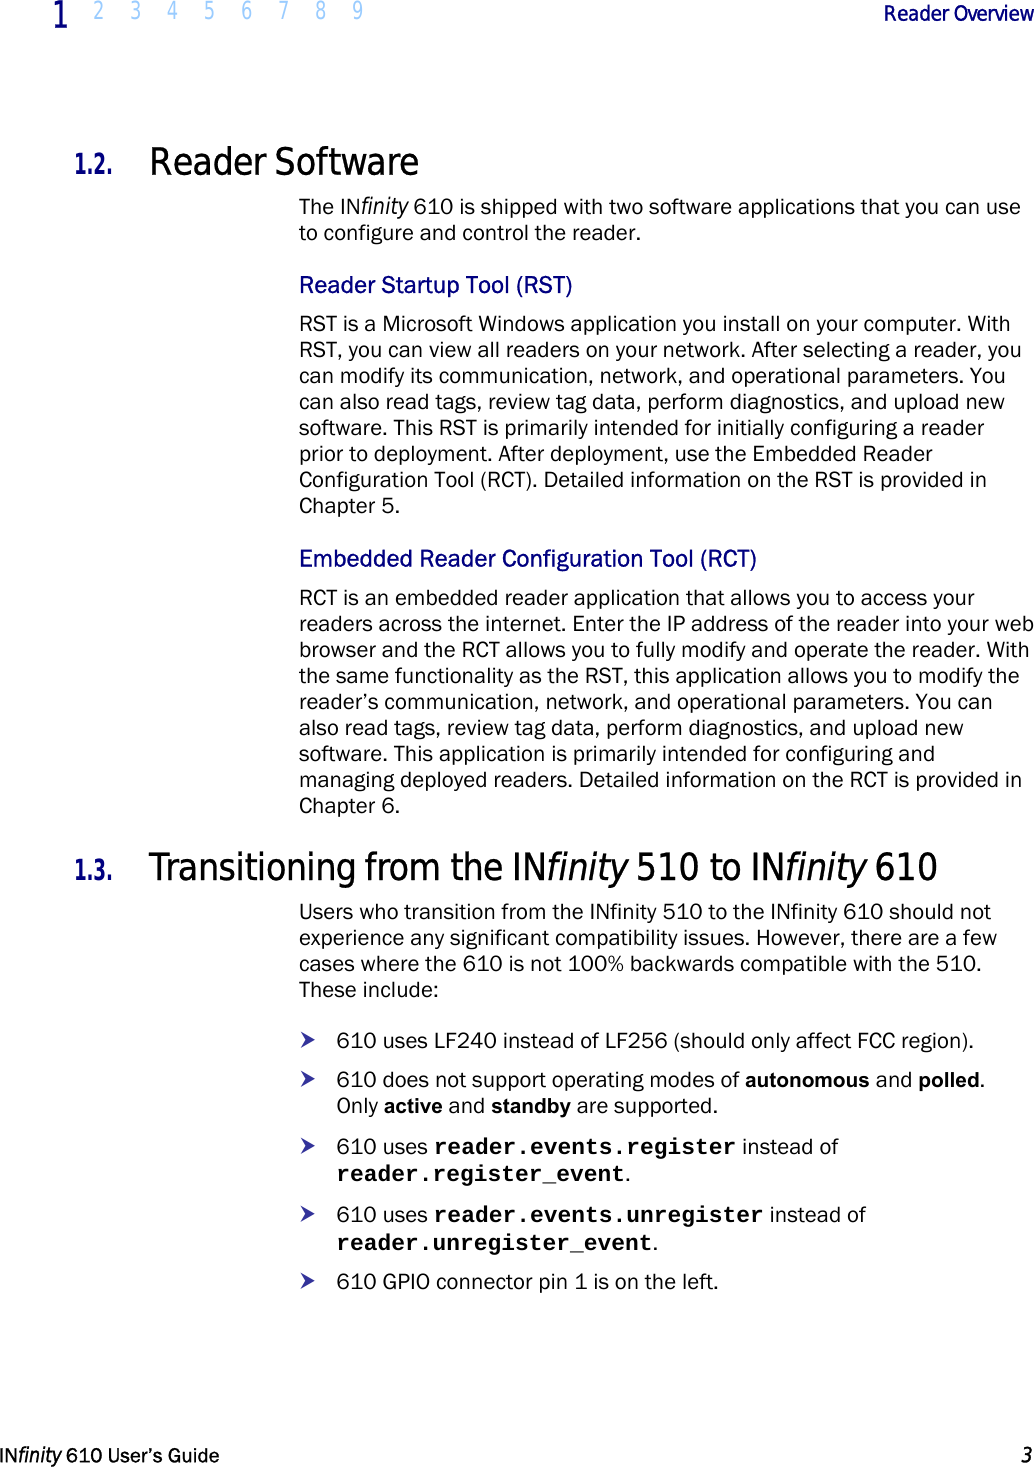  1  2 3 4 5 6 7 8 9             Reader Overview   INfinity 610 User’s Guide  3  1.2. Reader Software The INfinity 610 is shipped with two software applications that you can use to configure and control the reader. Reader Startup Tool (RST) RST is a Microsoft Windows application you install on your computer. With RST, you can view all readers on your network. After selecting a reader, you can modify its communication, network, and operational parameters. You can also read tags, review tag data, perform diagnostics, and upload new software. This RST is primarily intended for initially configuring a reader prior to deployment. After deployment, use the Embedded Reader Configuration Tool (RCT). Detailed information on the RST is provided in Chapter 5. Embedded Reader Configuration Tool (RCT) RCT is an embedded reader application that allows you to access your readers across the internet. Enter the IP address of the reader into your web browser and the RCT allows you to fully modify and operate the reader. With the same functionality as the RST, this application allows you to modify the reader’s communication, network, and operational parameters. You can also read tags, review tag data, perform diagnostics, and upload new software. This application is primarily intended for configuring and managing deployed readers. Detailed information on the RCT is provided in Chapter 6. 1.3. Transitioning from the INfinity 510 to INfinity 610 Users who transition from the INfinity 510 to the INfinity 610 should not experience any significant compatibility issues. However, there are a few cases where the 610 is not 100% backwards compatible with the 510. These include: h 610 uses LF240 instead of LF256 (should only affect FCC region). h 610 does not support operating modes of autonomous and polled.   Only active and standby are supported. h 610 uses reader.events.register instead of reader.register_event. h 610 uses reader.events.unregister instead of reader.unregister_event. h 610 GPIO connector pin 1 is on the left.  